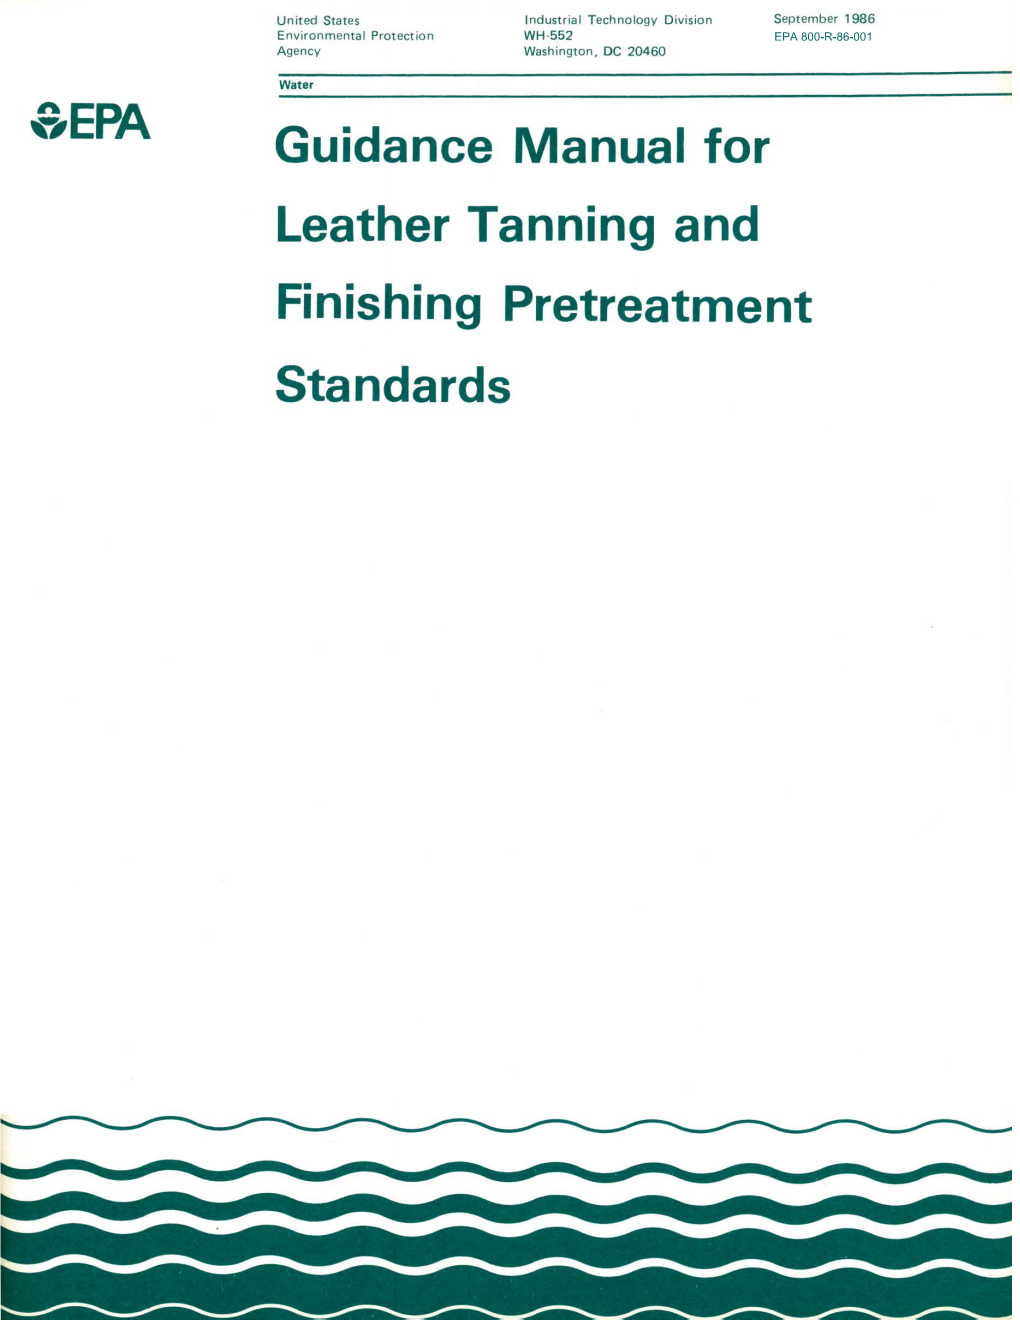 Guidance Manual for Leather Tanning and Finishing Pretreatment Standards GUIDANCE MANUAL for LEATHER TANNING and FINISHING PRETREATMENT STANDARDS